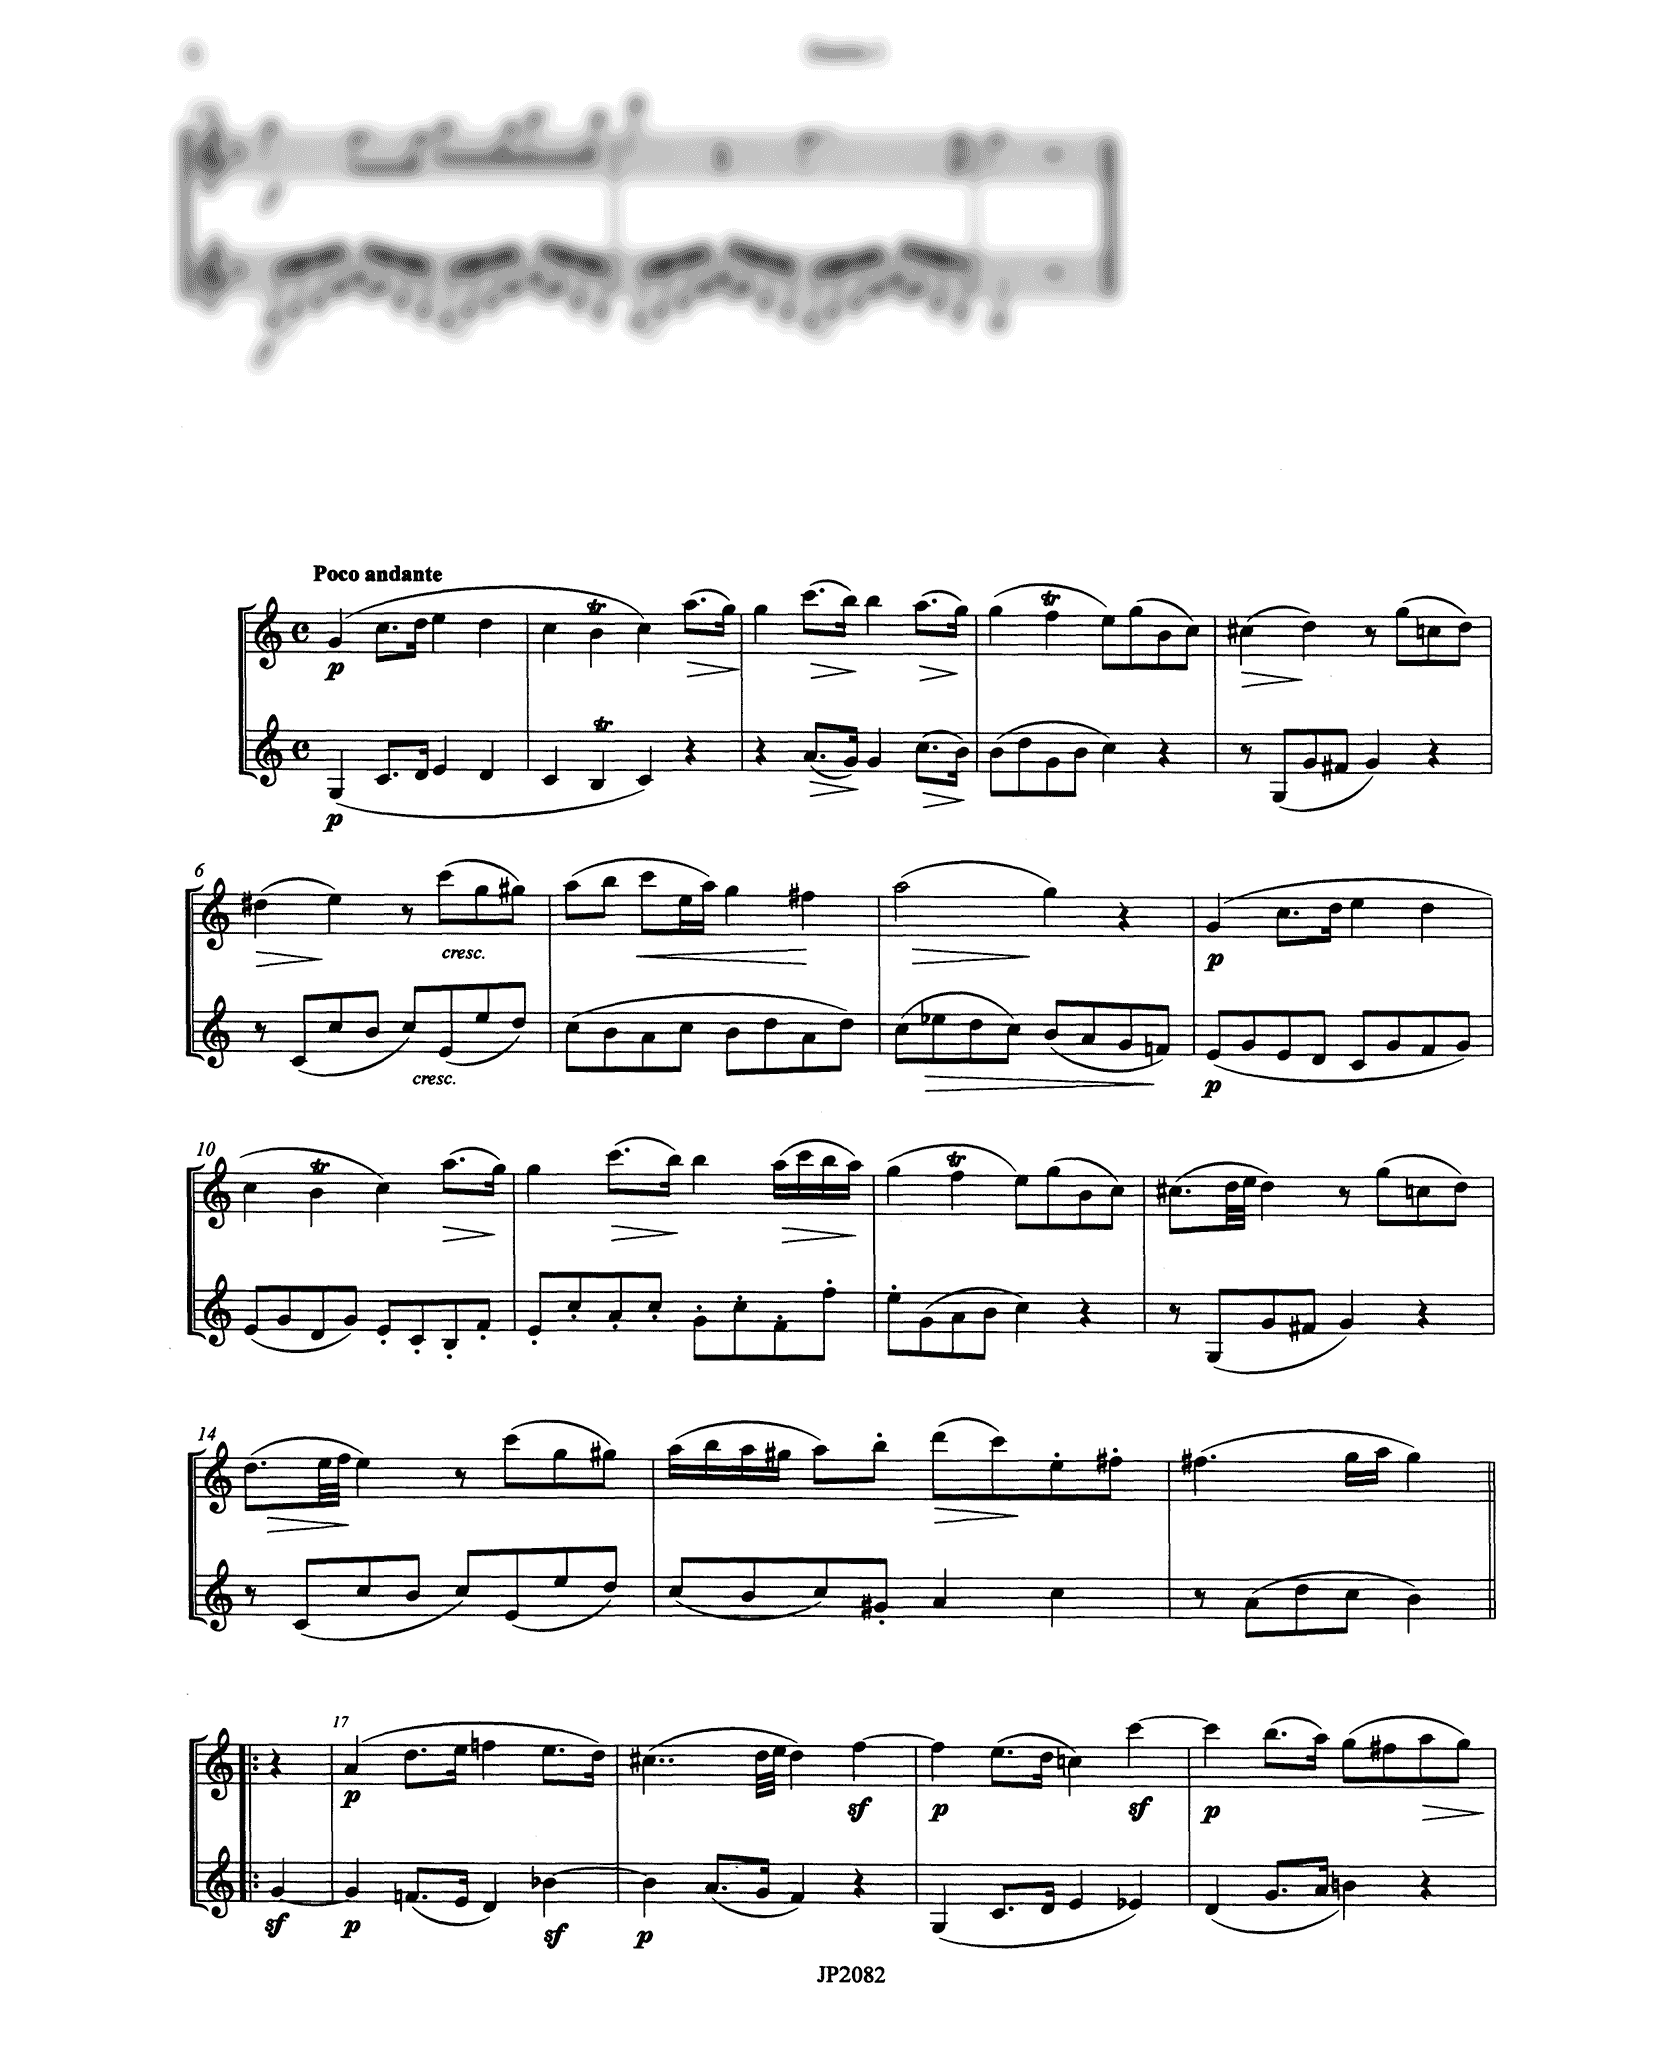 Crusell Clarinet Duet No. 1 in F Major score - Movement 2